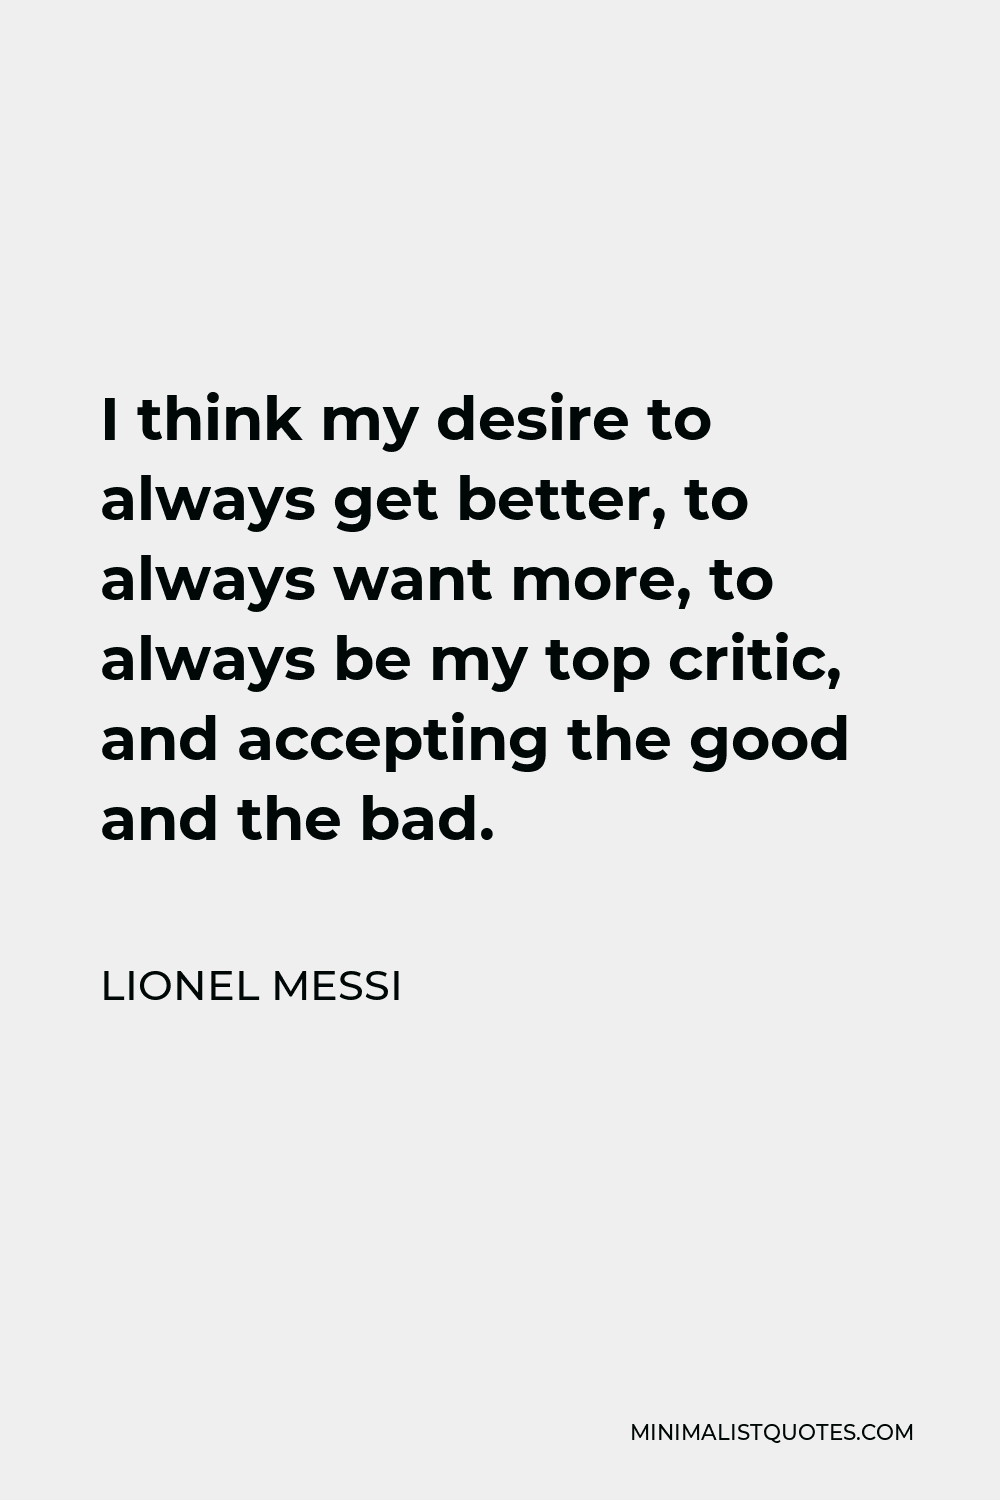 Lionel Messi Quote - I think my desire to always get better, to always want more, to always be my top critic, and accepting the good and the bad.